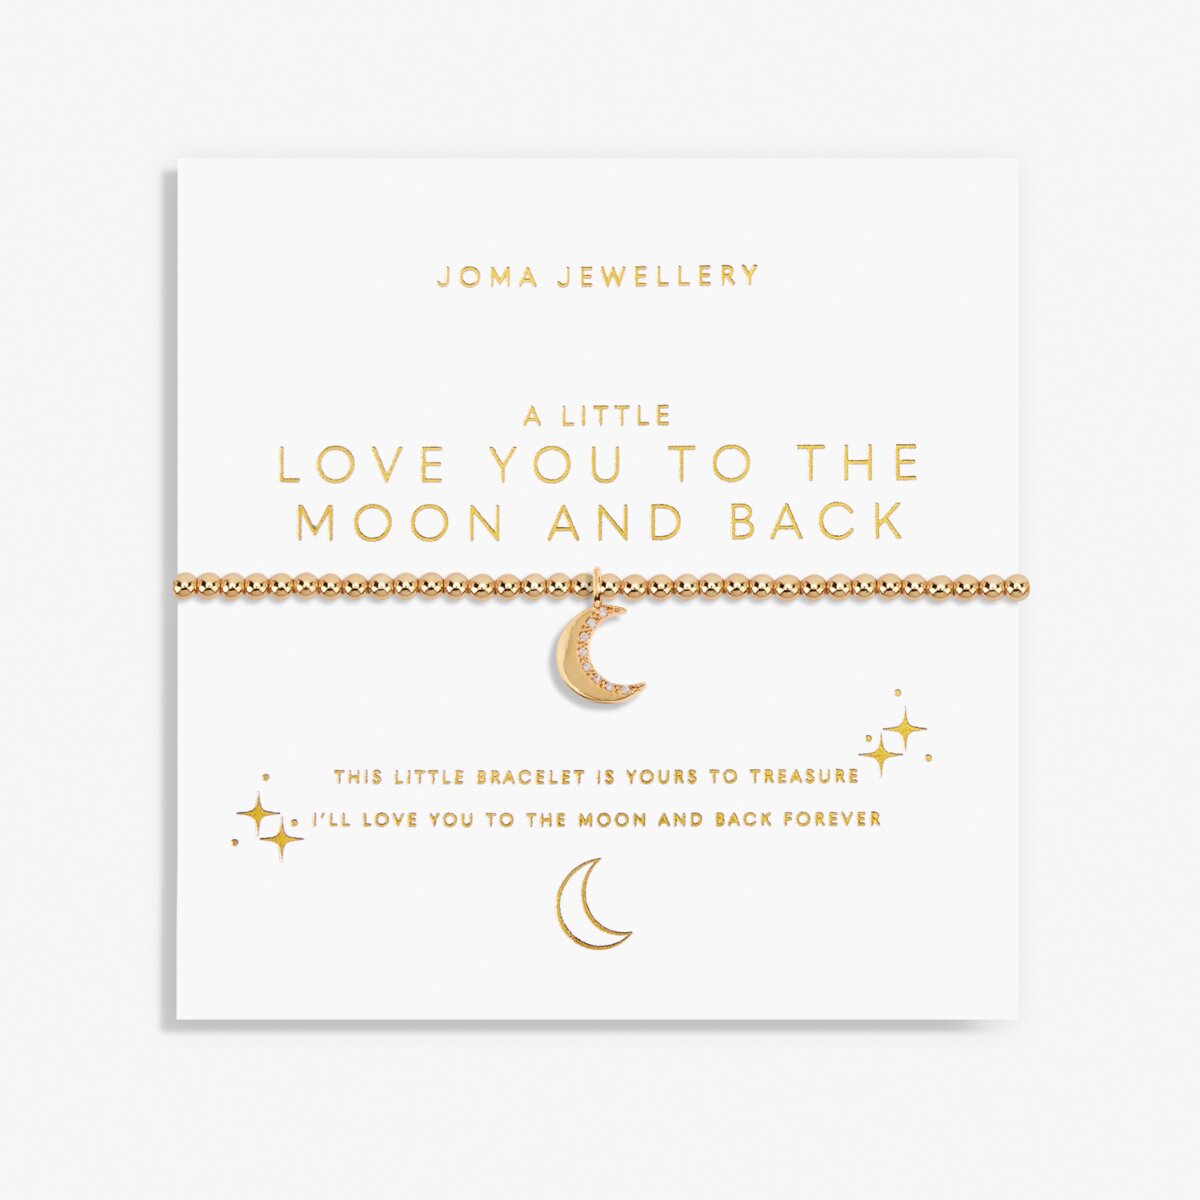 JOMA JEWELLERY | GOLD A LITTLE | LOVE YOU TO THE MOON AND BACK BRACELET